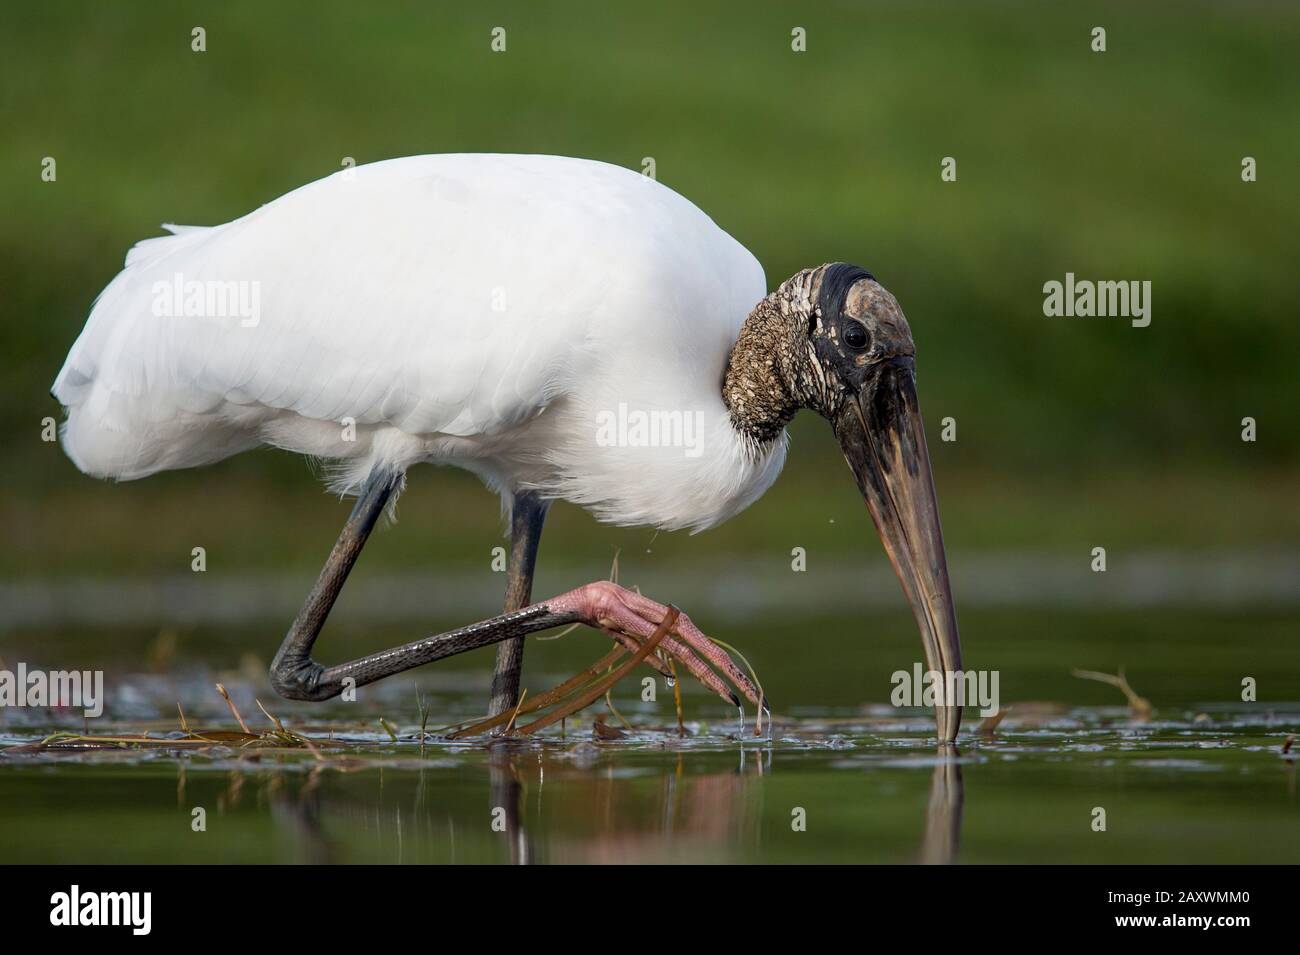 A Wood Stork wading in shallow water as it hunts for small fish in the soft overcast light with a smooth green background. Stock Photo